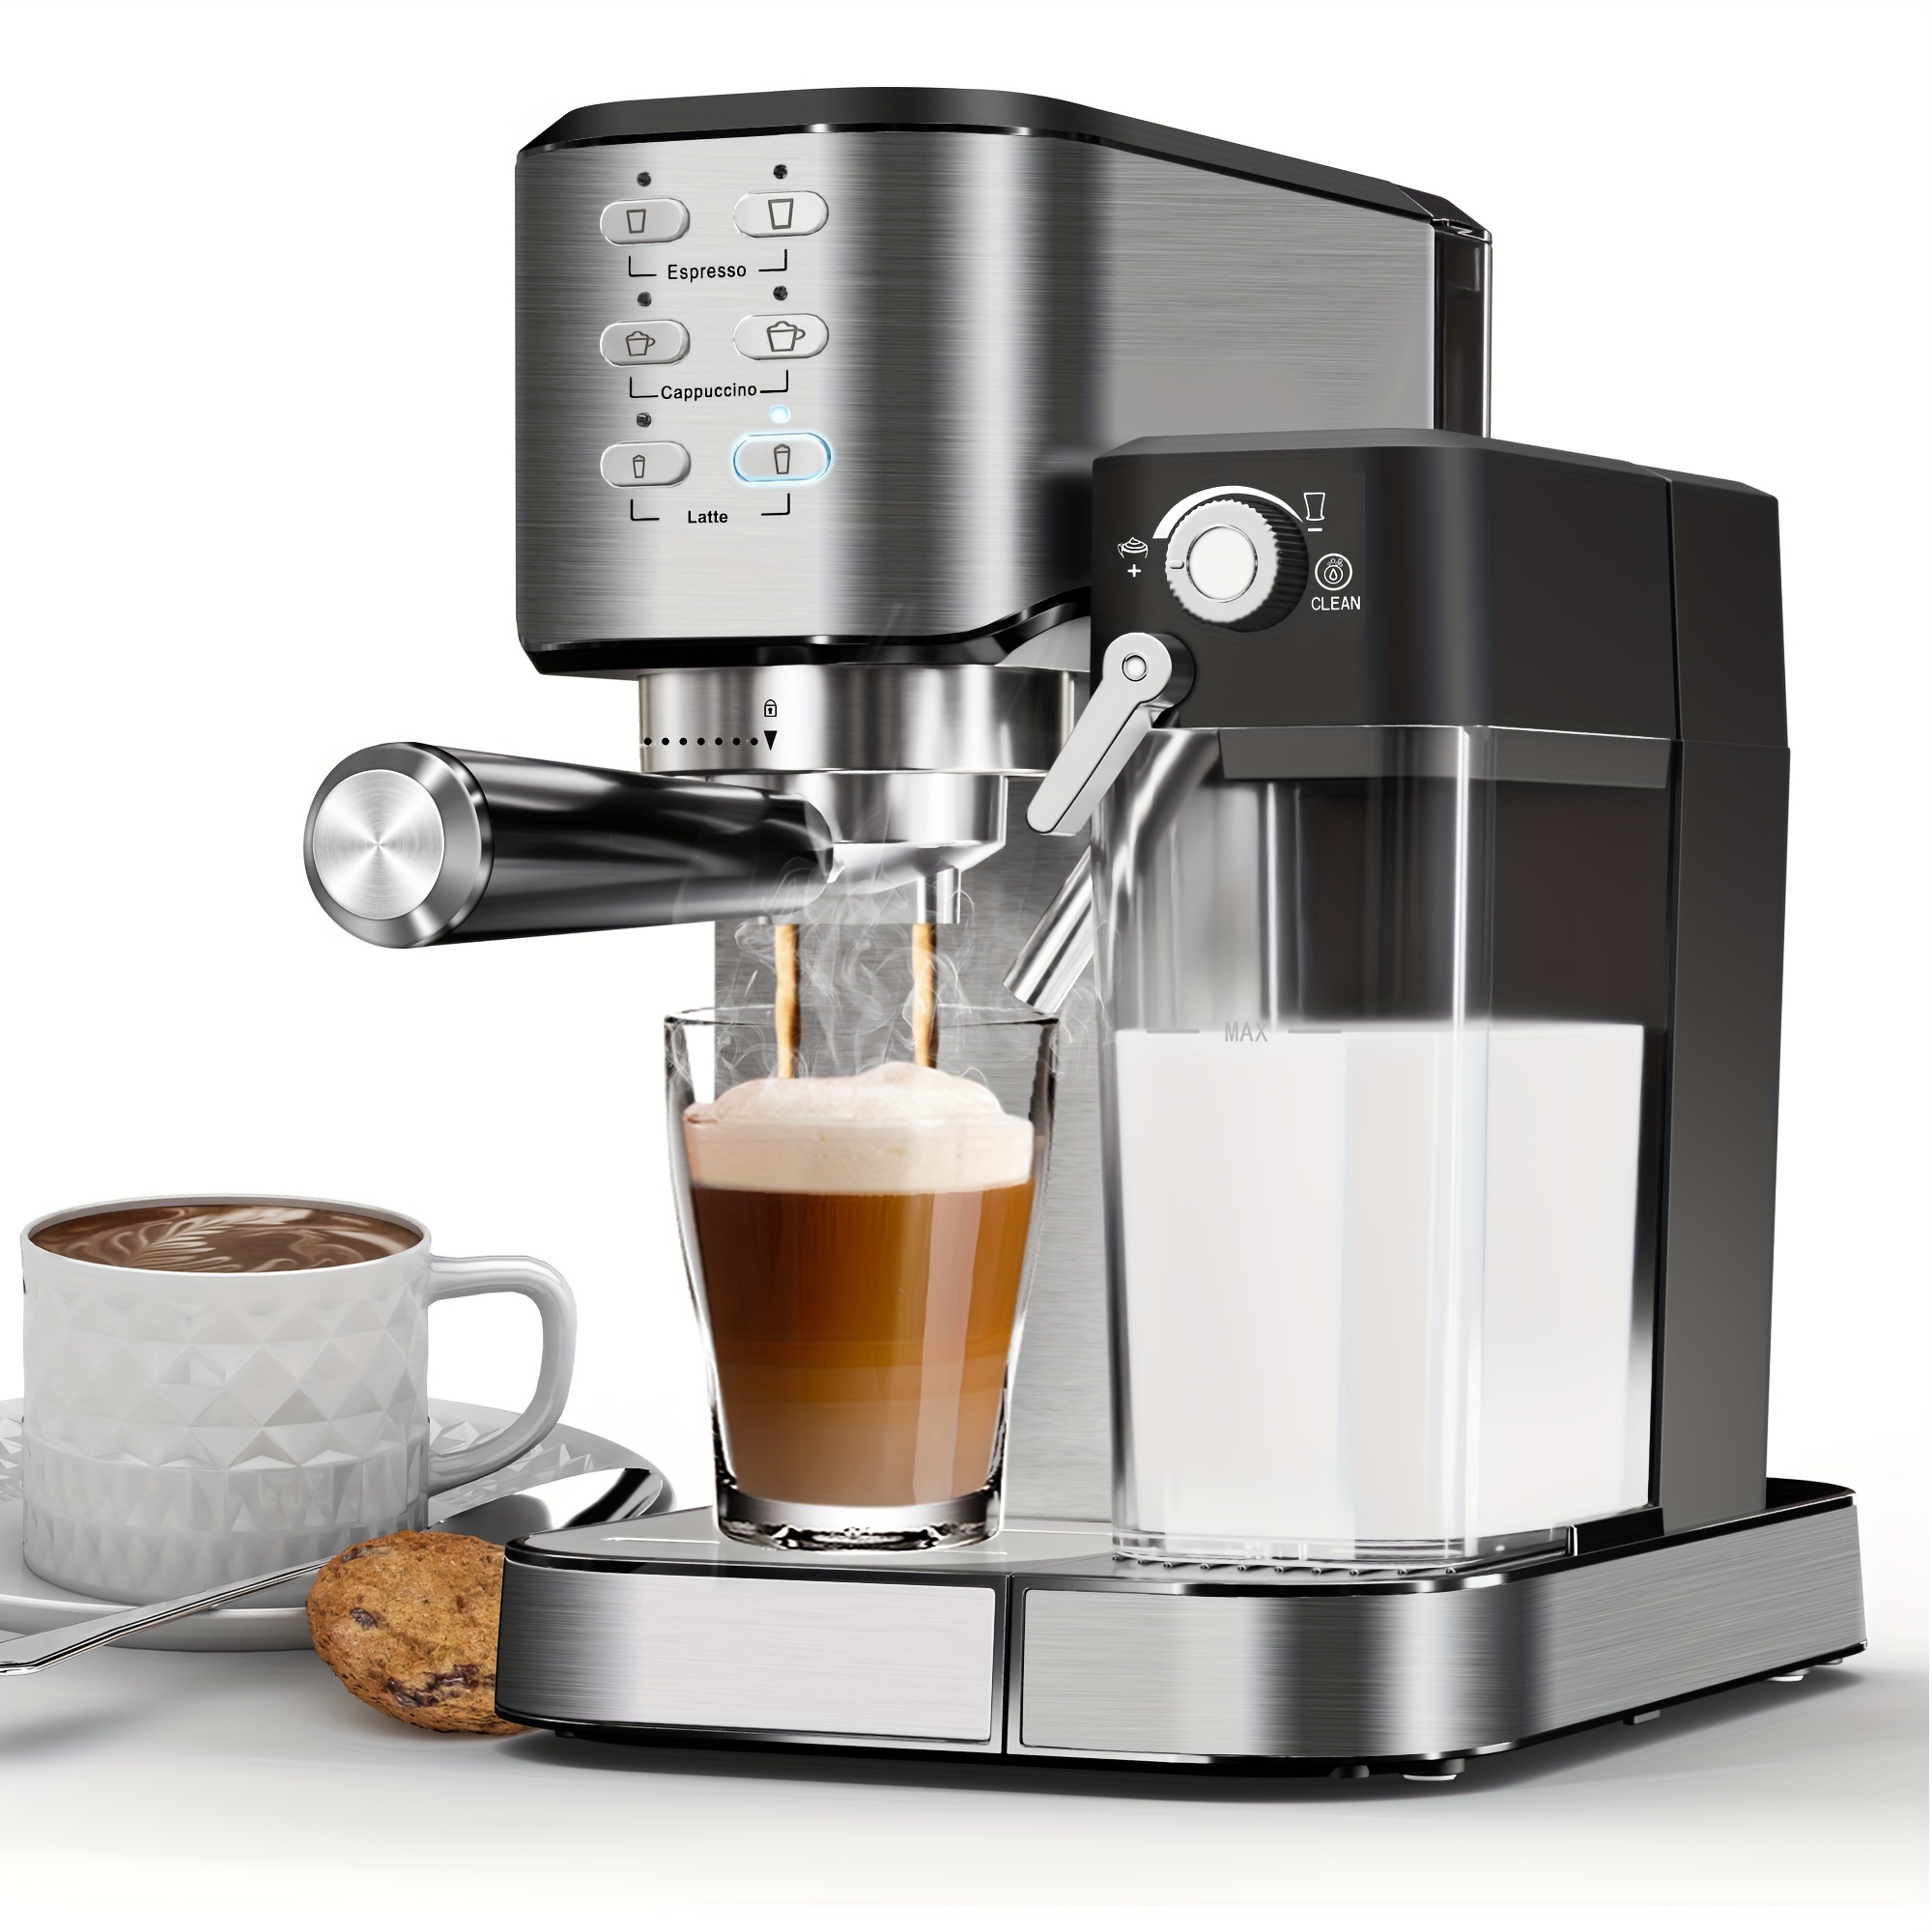 

6-in-1 Espresso Machine, 20 Bar Cappuccino & Latte Machine With Built-in Milk Frother, One-touch Single Or Double Shot, 1350w, Stainless Steel